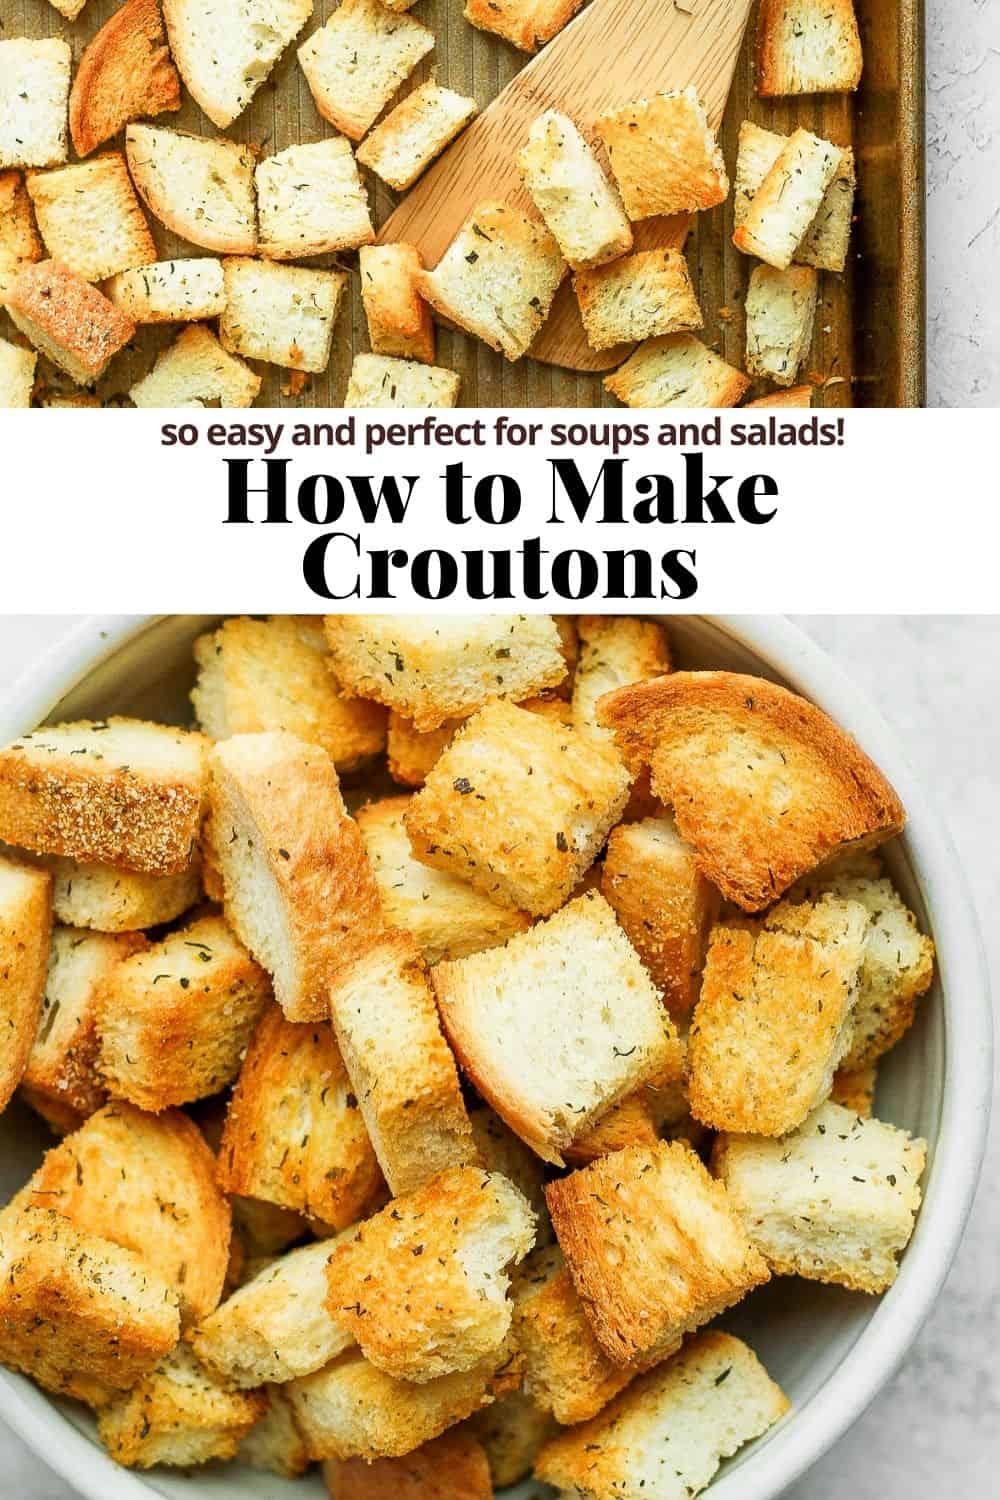 Pinterest image for how to make croutons.